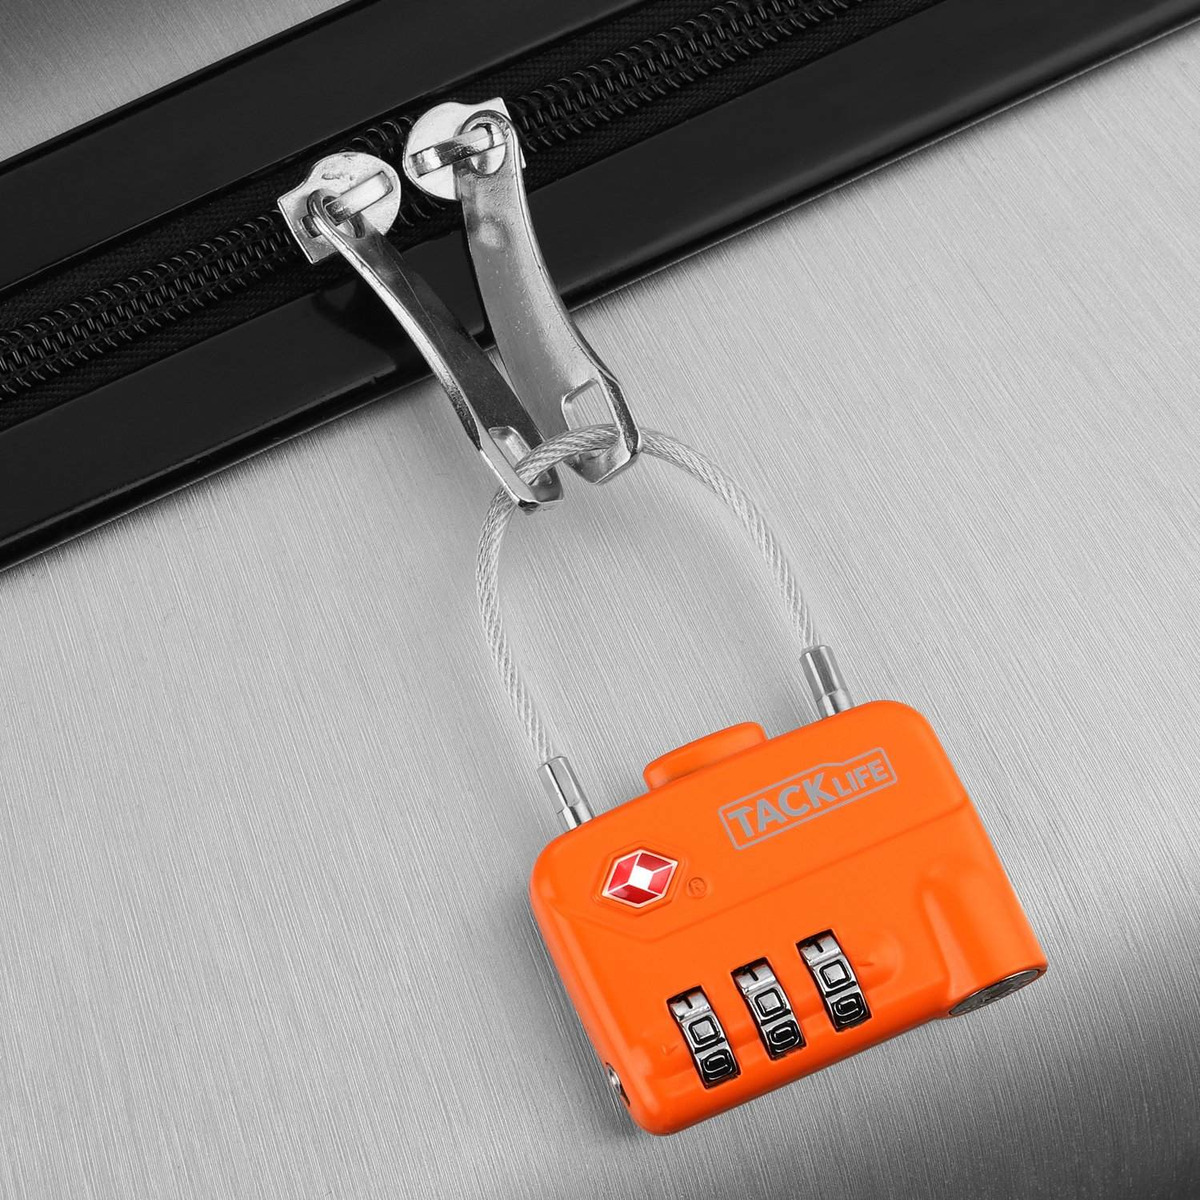 2 Pack Backpack 3 Digit Combination Locks for Suitcase Travel Locks Baggage Cable Locks HCL1A Orange TACKLIFE TSA Approved Luggage Locks